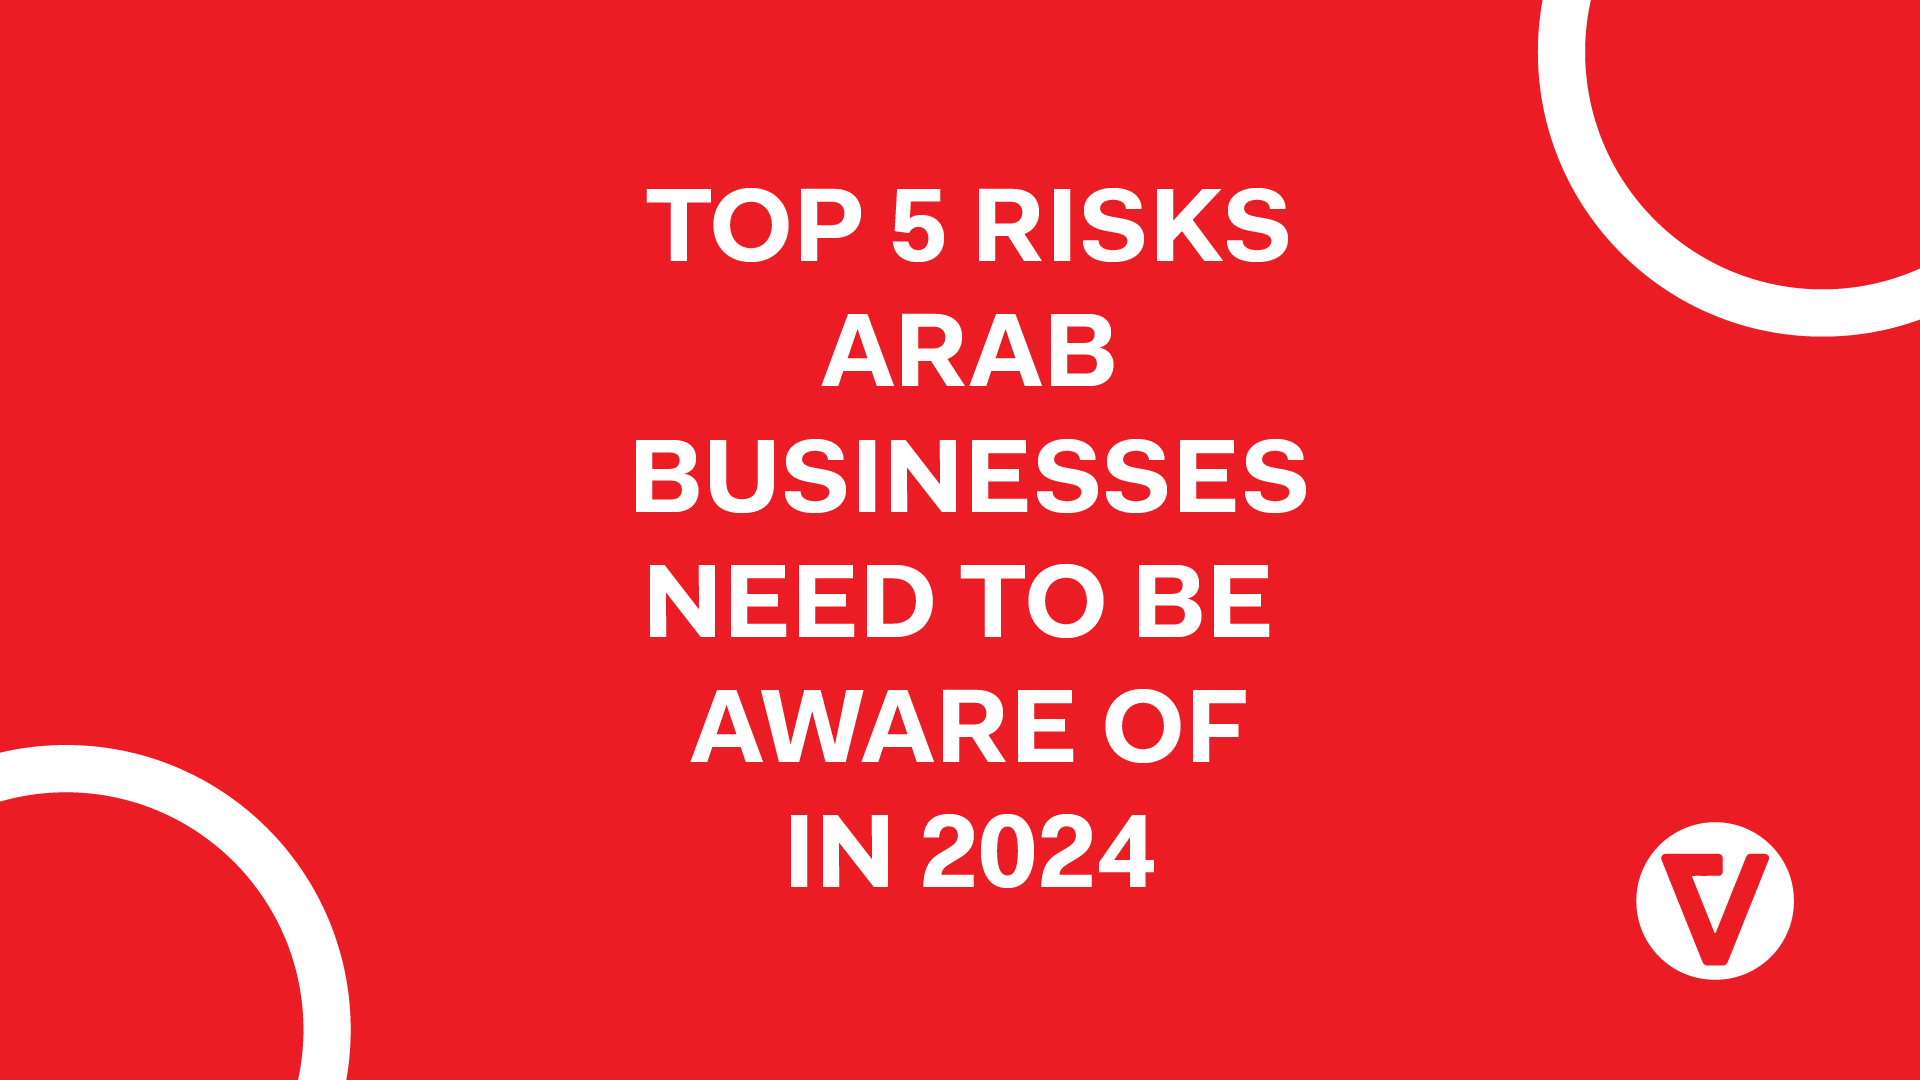 Top 5 risks businesses in the MENA region need to navigate in 2024